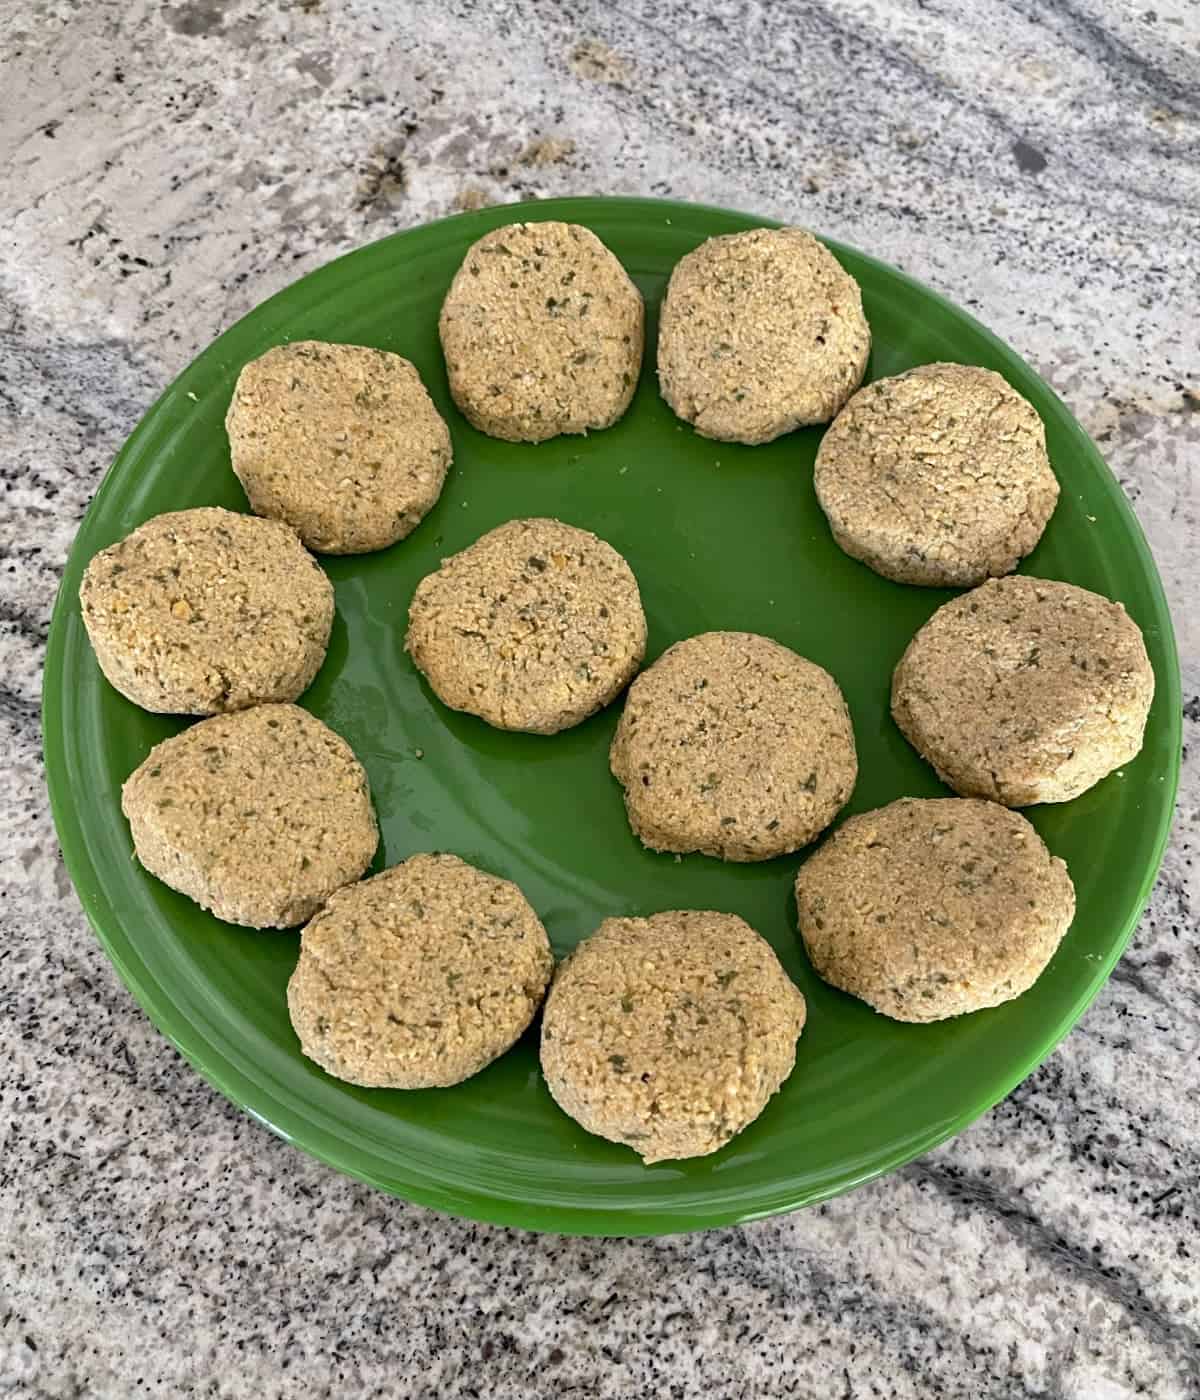 Uncooked falafel patties on large green plate on granite.